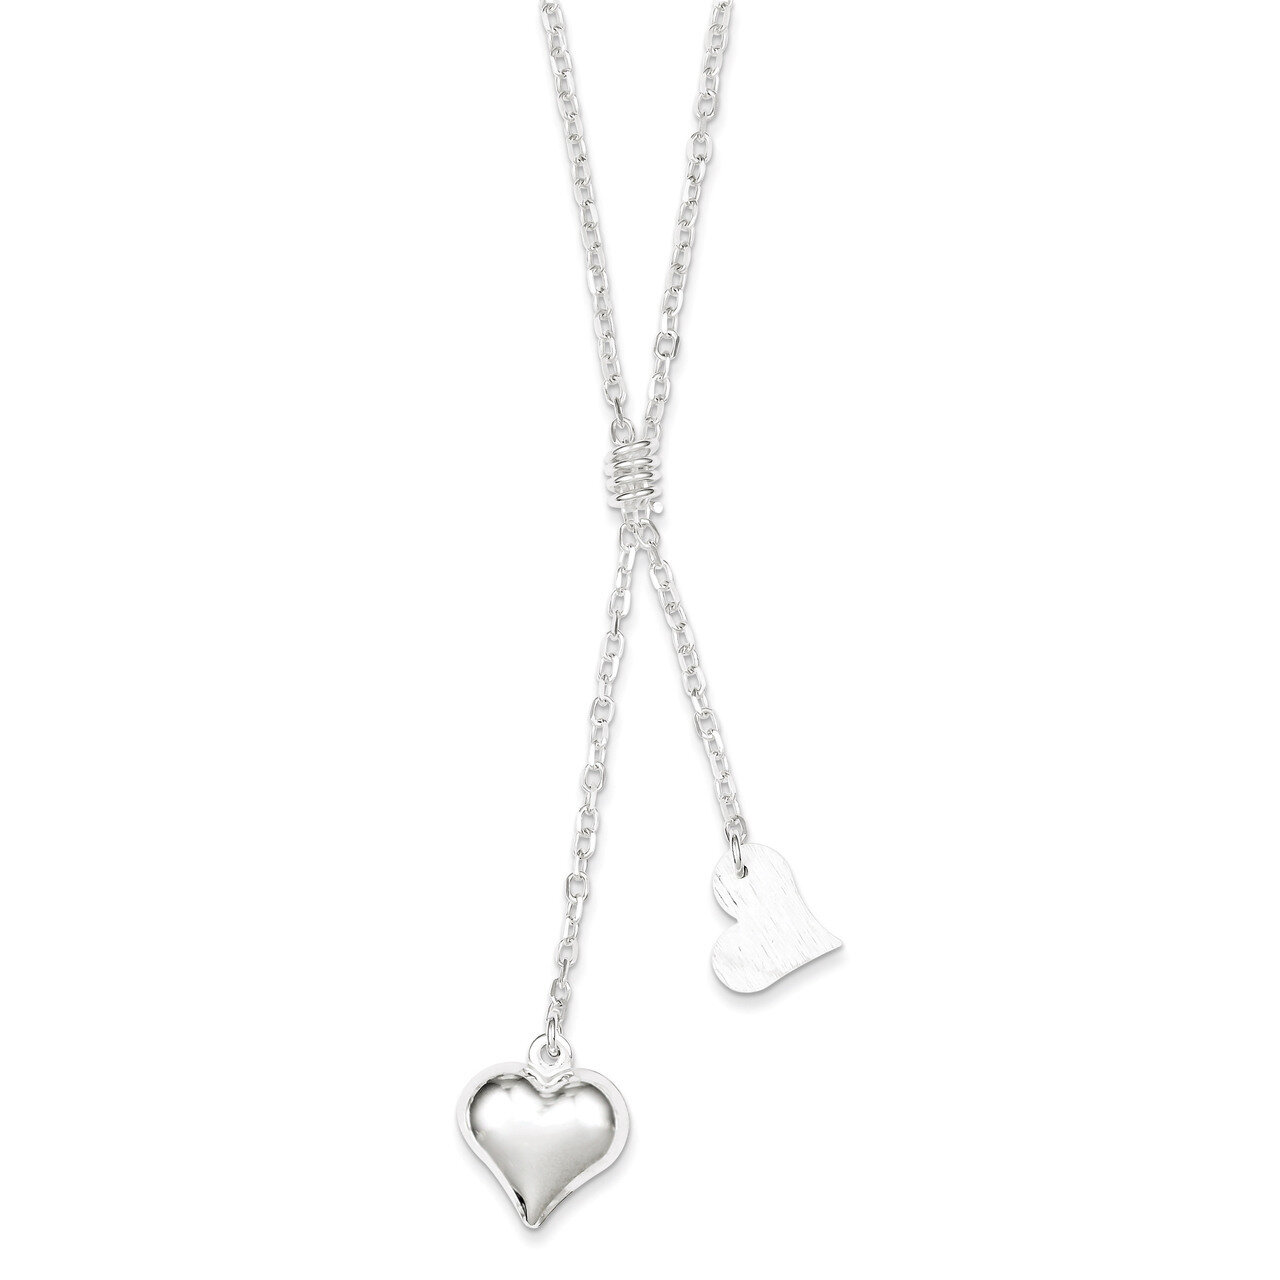 17 Inch Textured Puffed Heart Fancy Drop Necklace Sterling Silver Polished QG2881-17